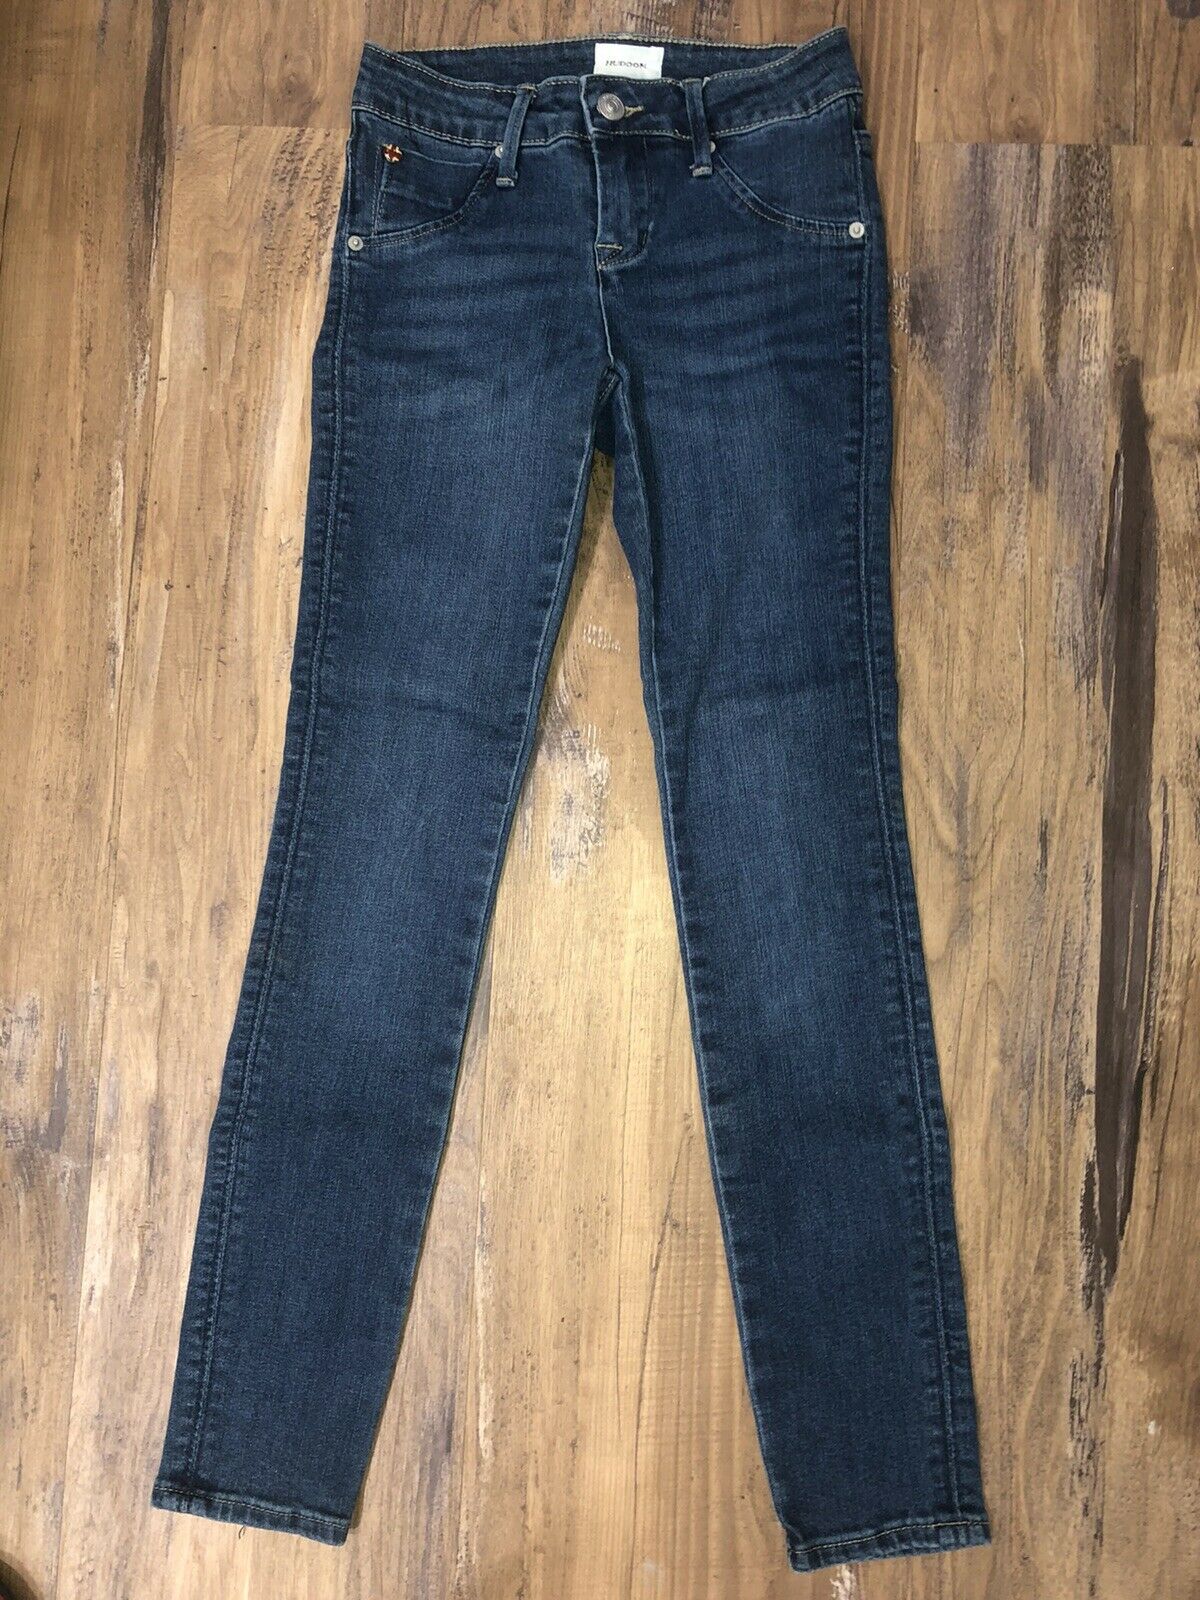 Girls Hudson Jeans Straight Skinny Blue Size 10 Excellent Condition!! Stretch